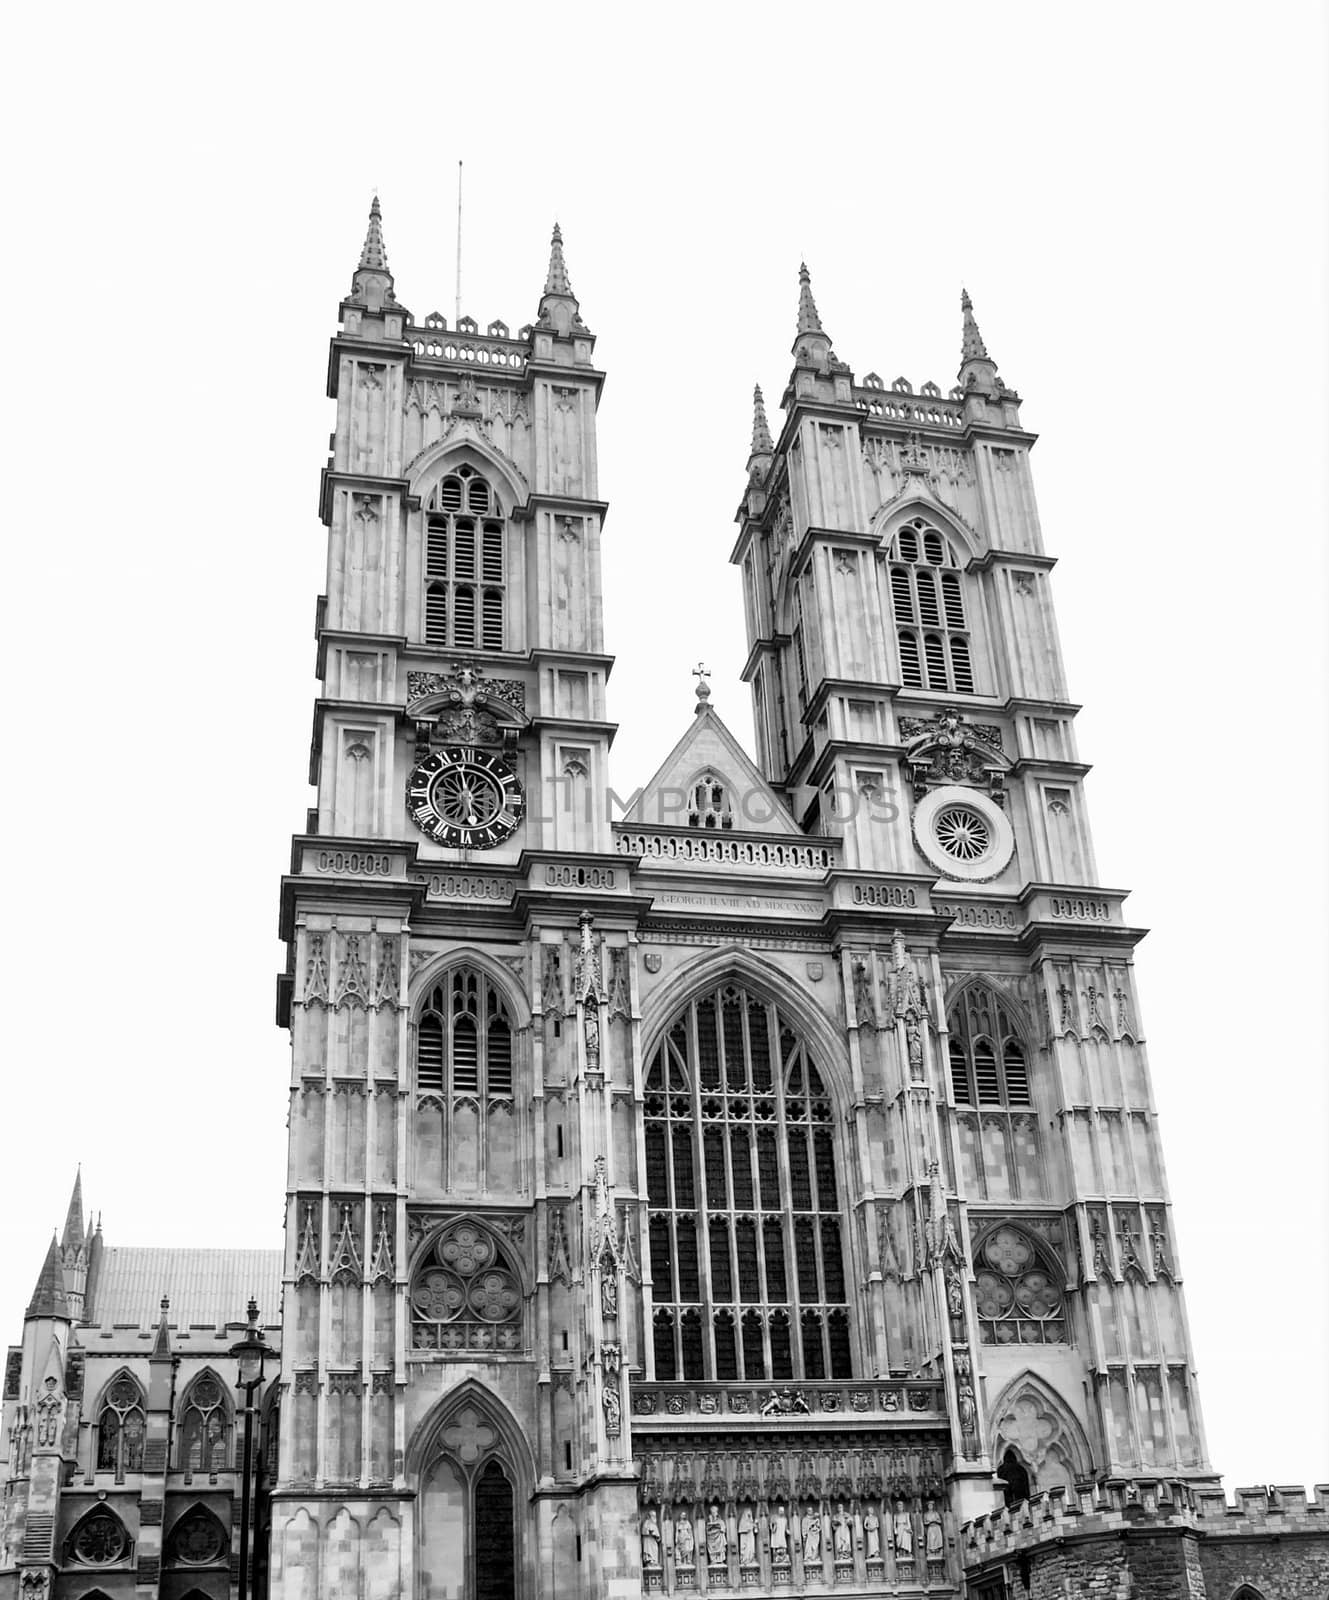 The Westminster Abbey church in London, UK - high dynamic range HDR - black and white